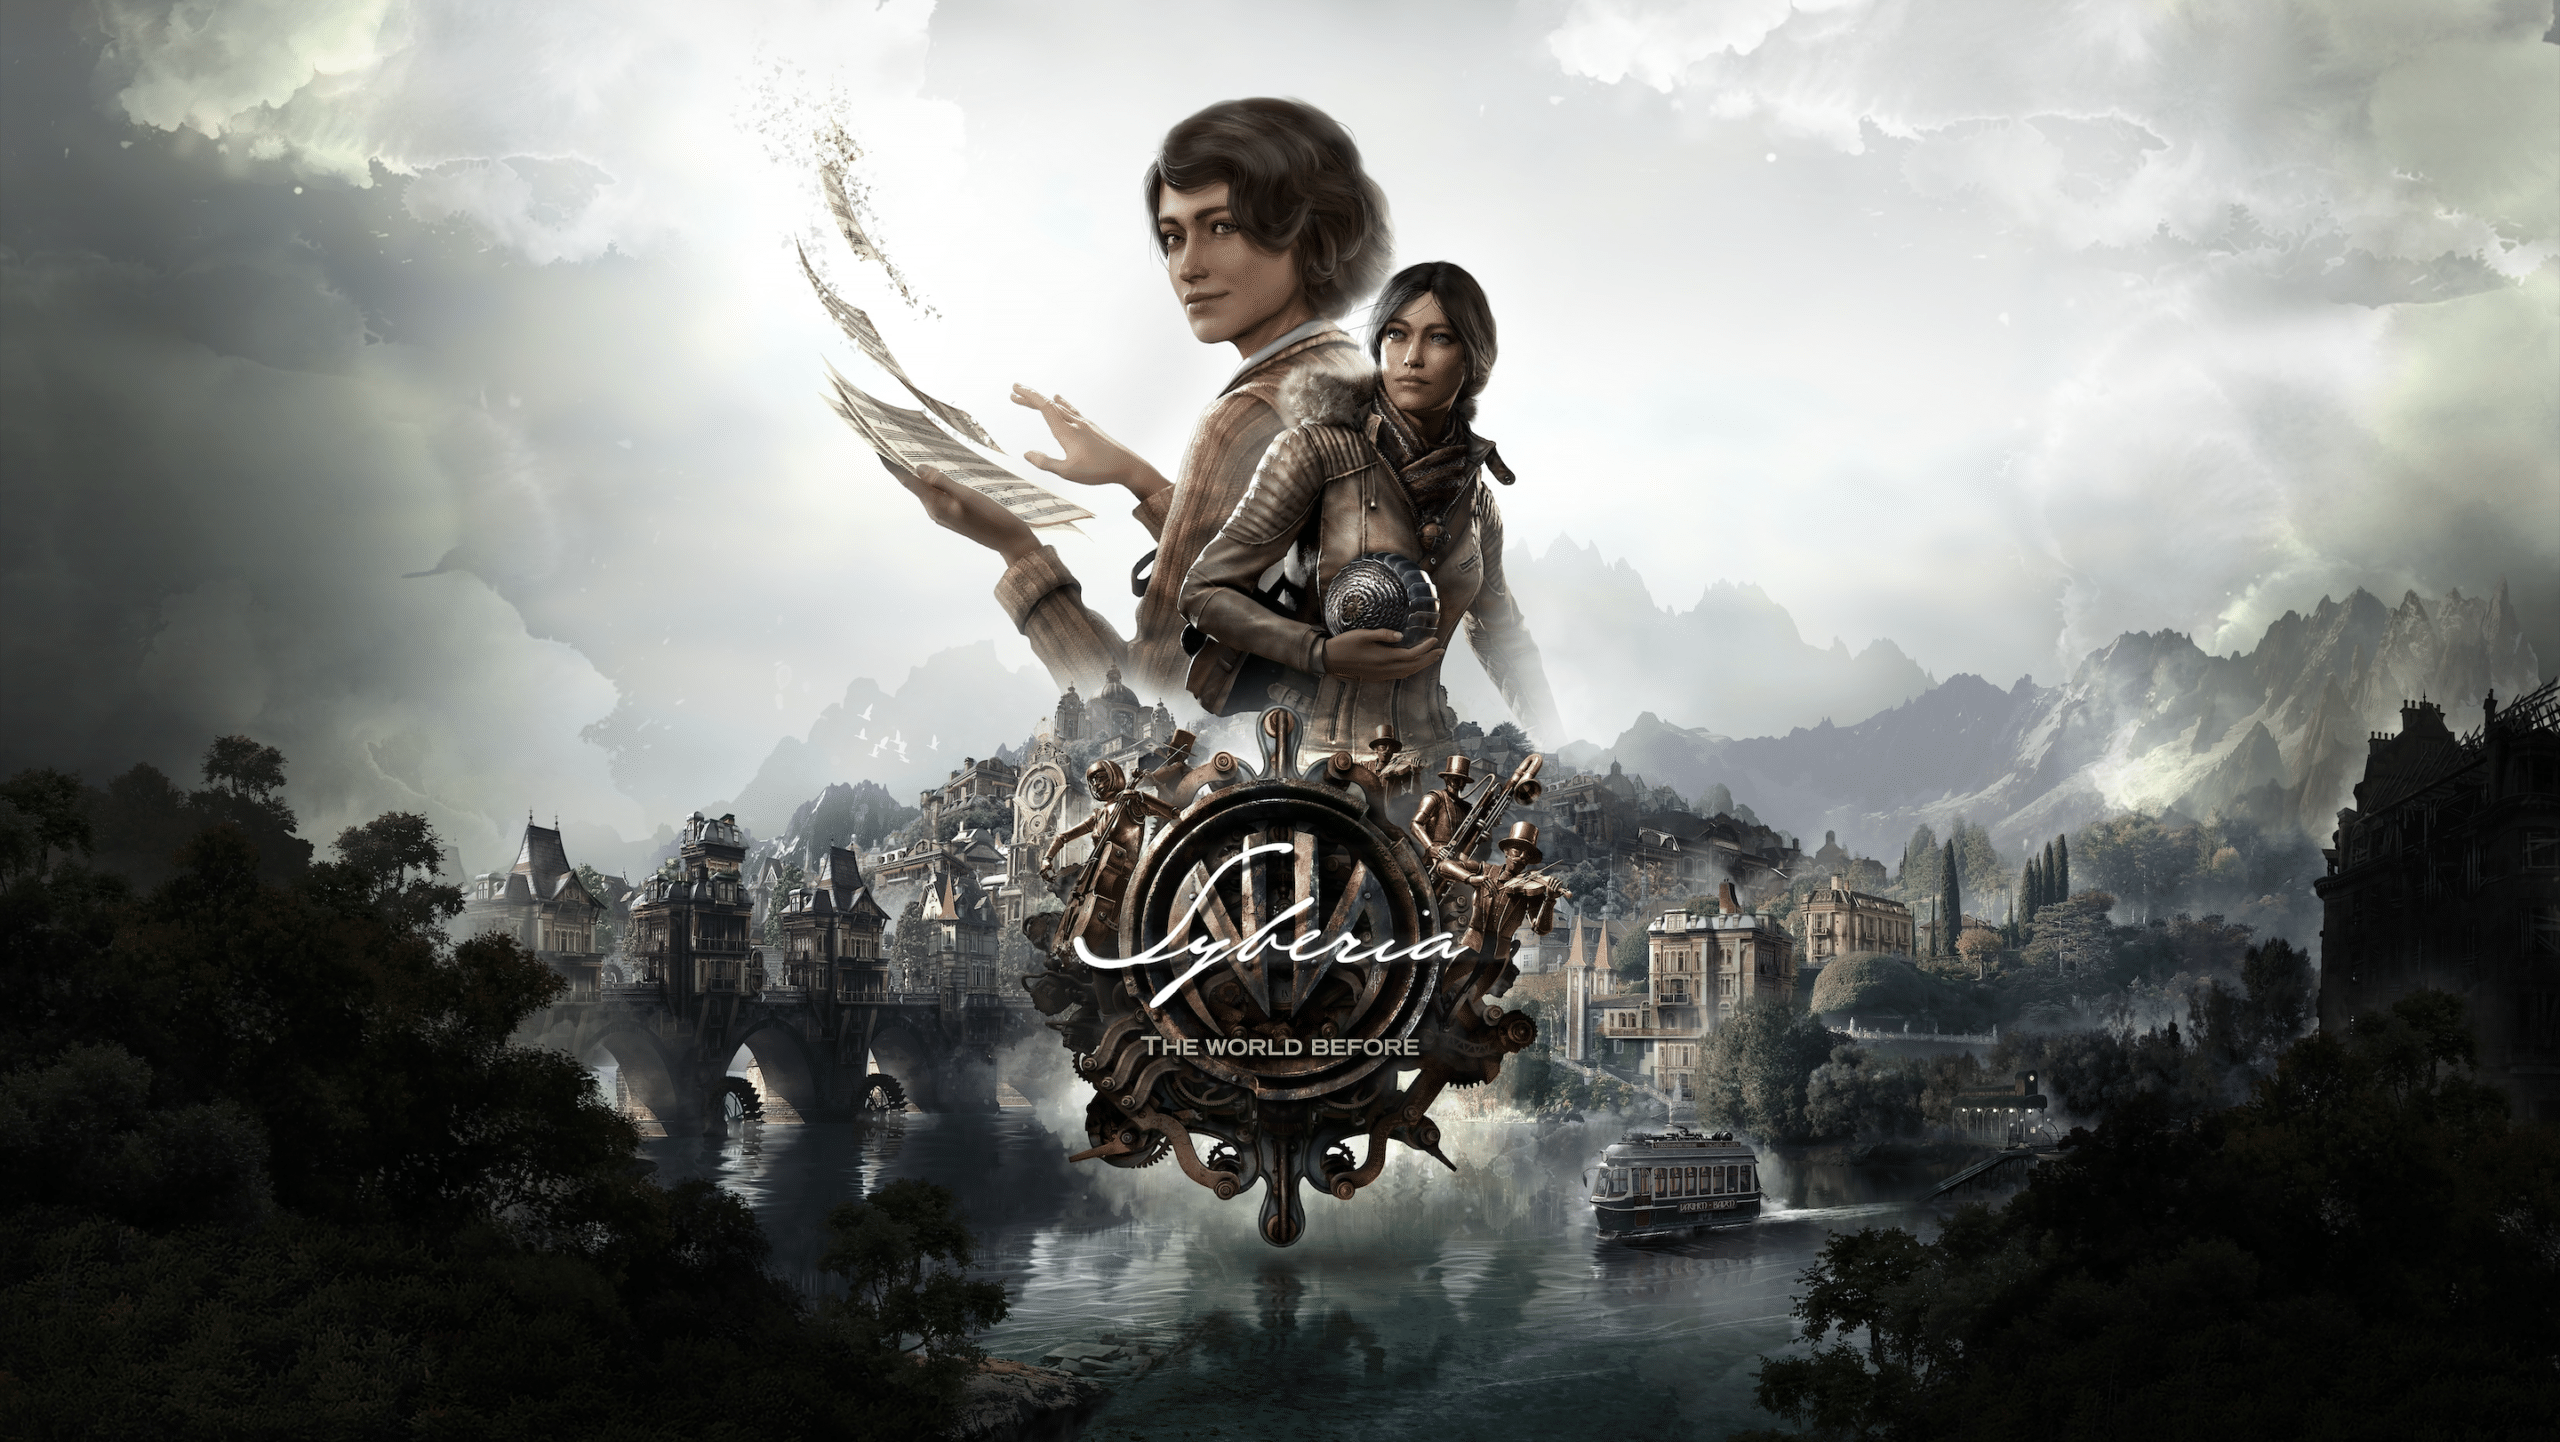 Here comes the physical and vinyl edition of the Syberia soundtrack: The World Before thumbnail